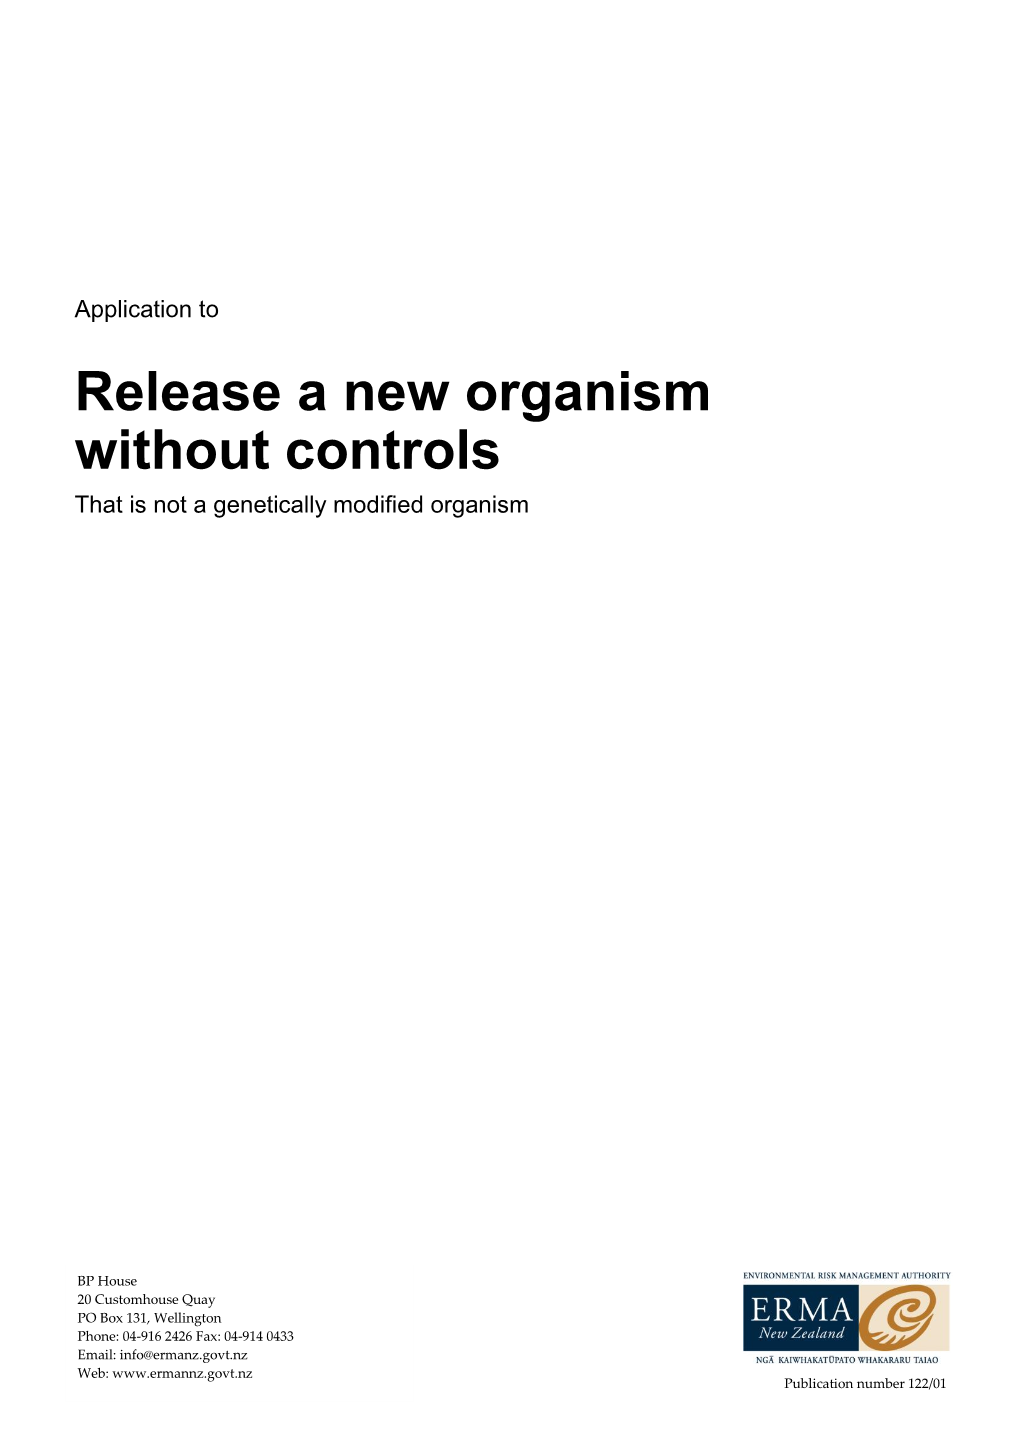 Release a New Organism Without Controls